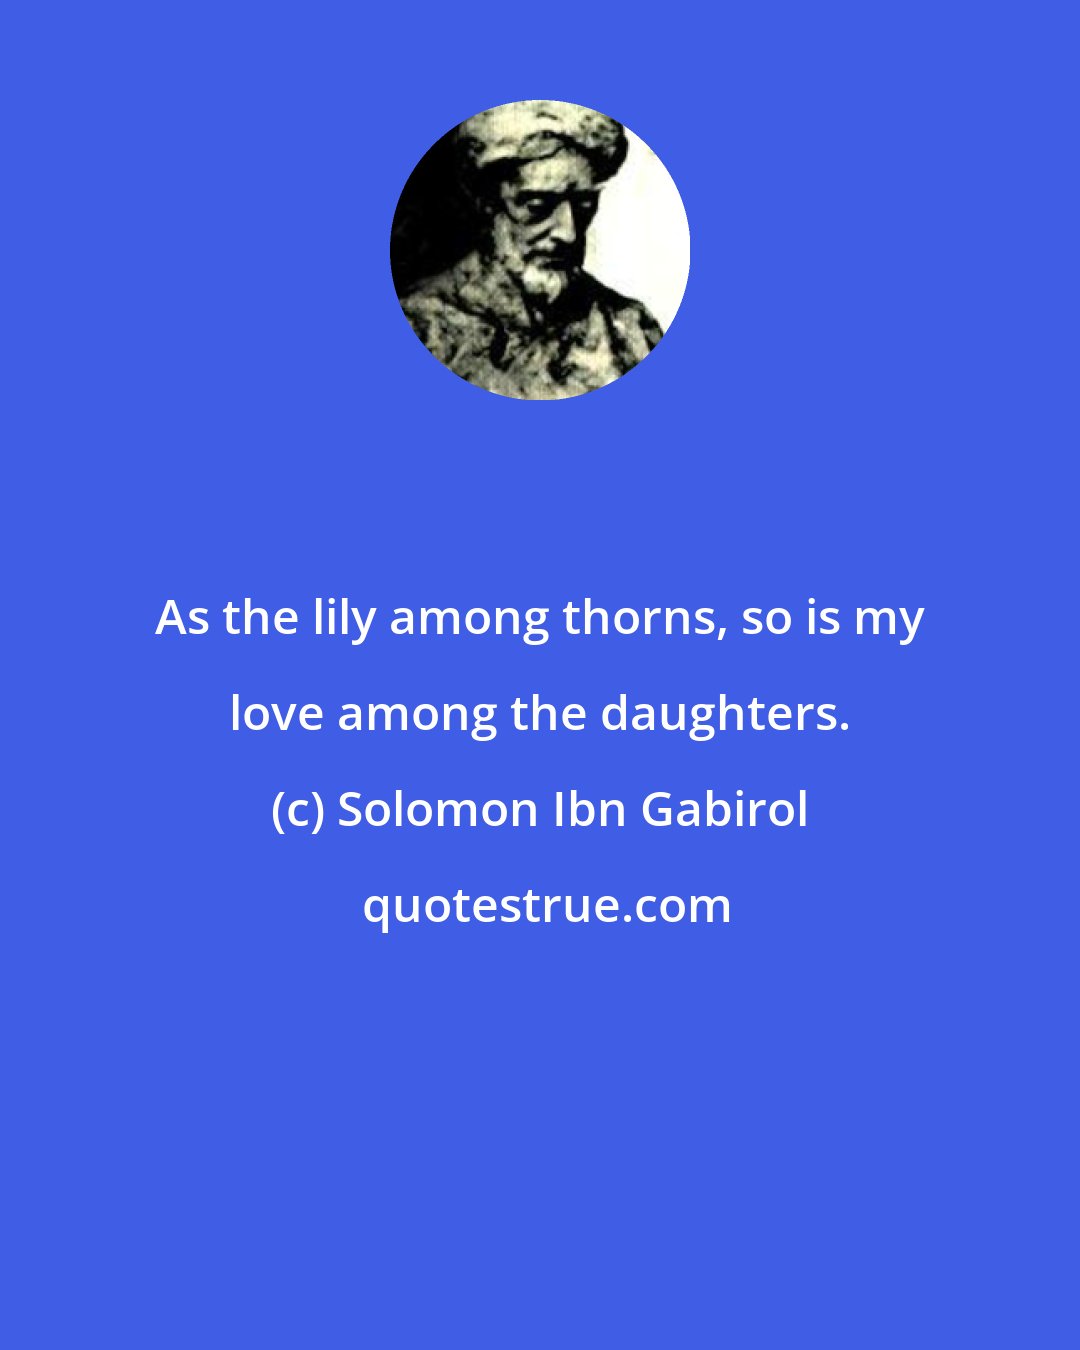 Solomon Ibn Gabirol: As the lily among thorns, so is my love among the daughters.